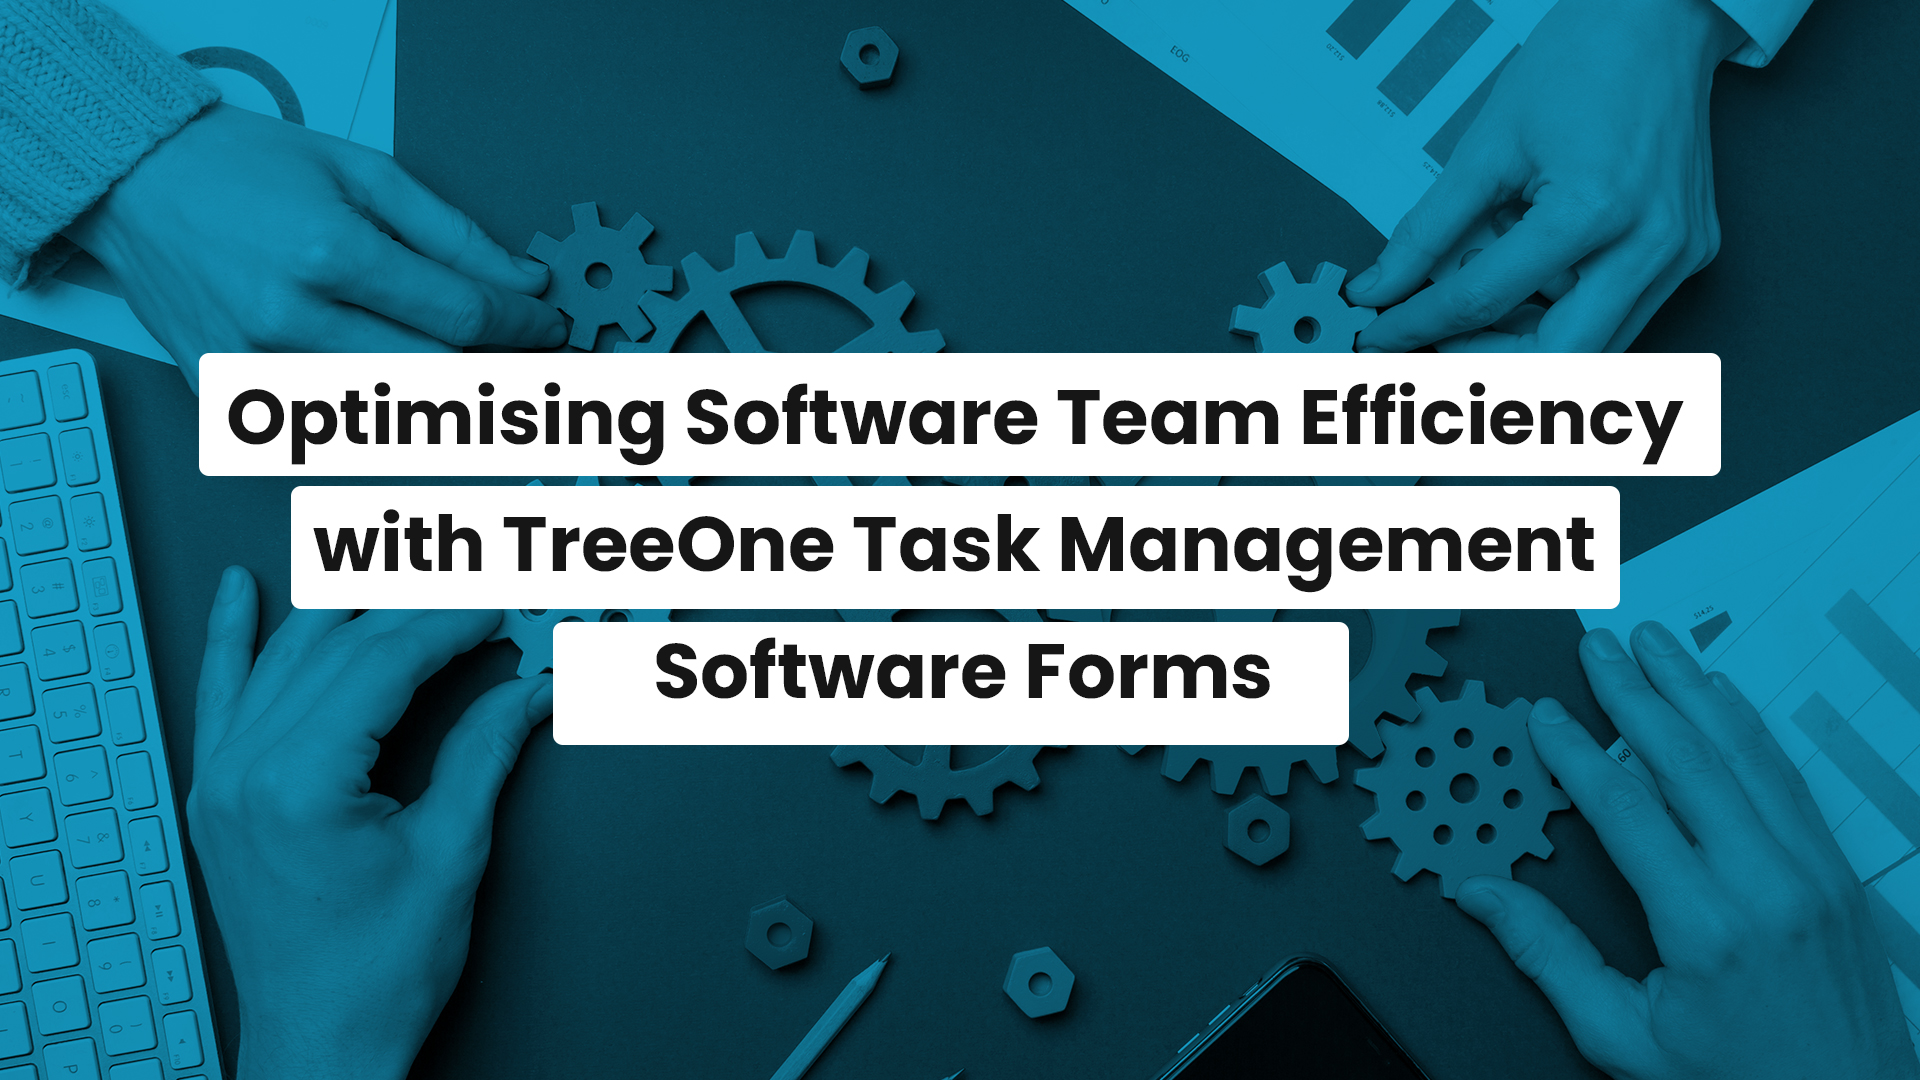 Optimising Software Team Efficiency with TreeOne Task Management Software Forms